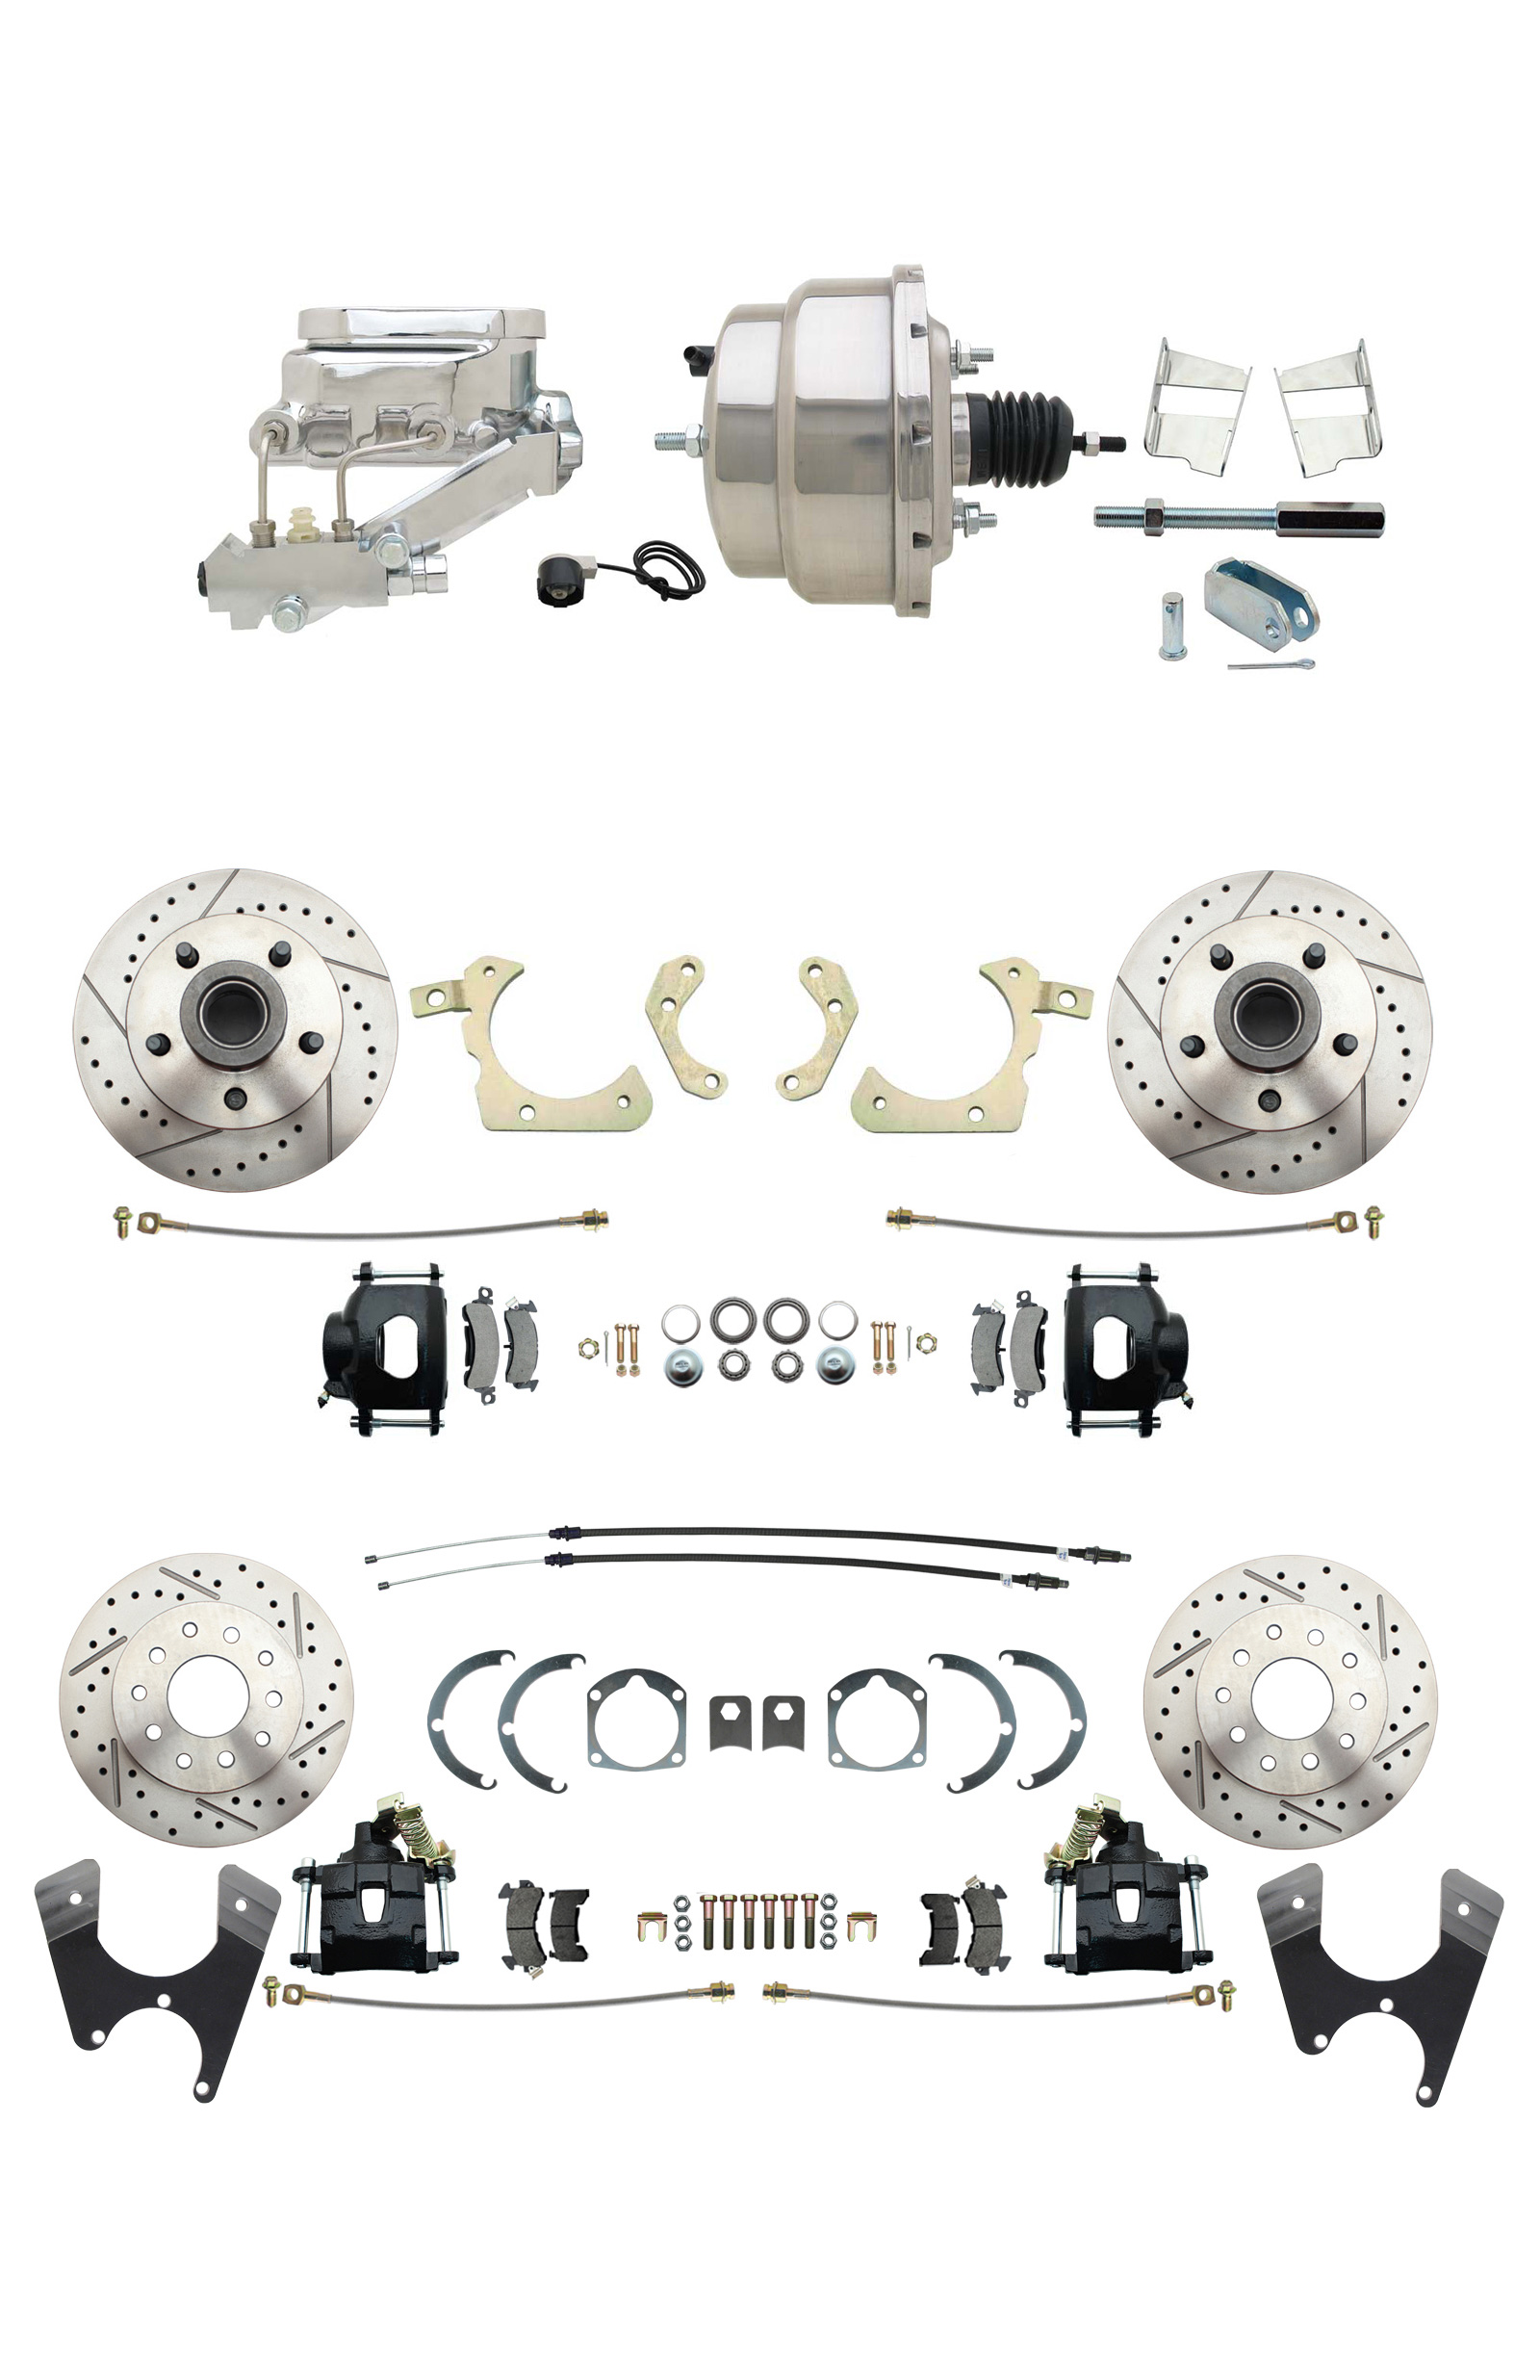 1959-1964 GM Full Size Front & Rear Power Disc Brake Kit Black Powder Coated Calipers Drilled/Slotted Rotors (Impala, Bel Air, Biscayne) & 8 Dual Chrome Booster Conversion Kit W/ Flat Top Chrome Master Cylinder Left Mou